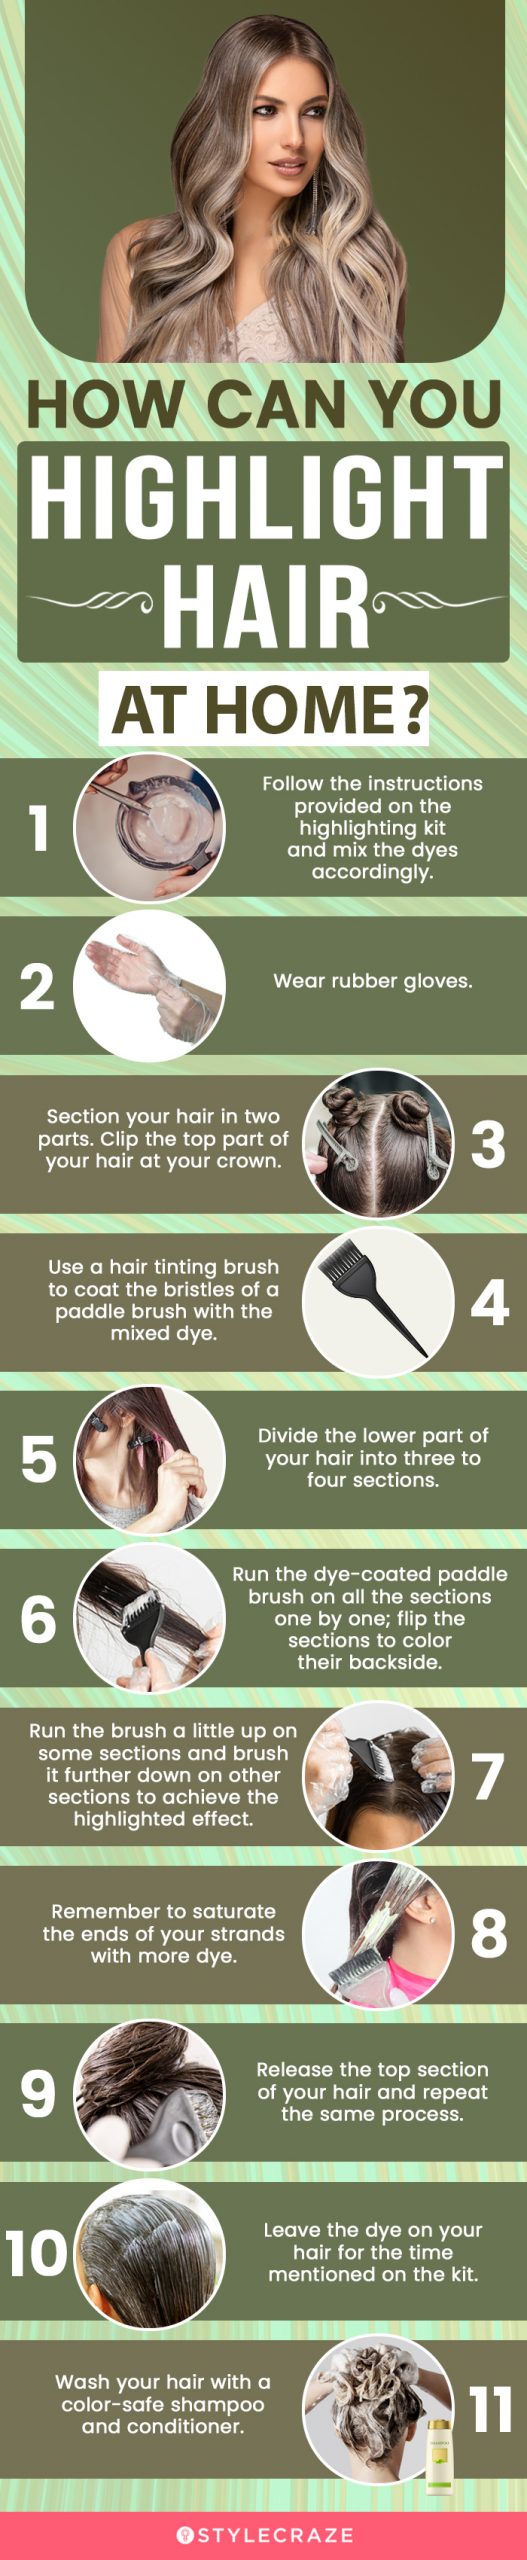 How Can You Highlight Hair At Home (infographic)